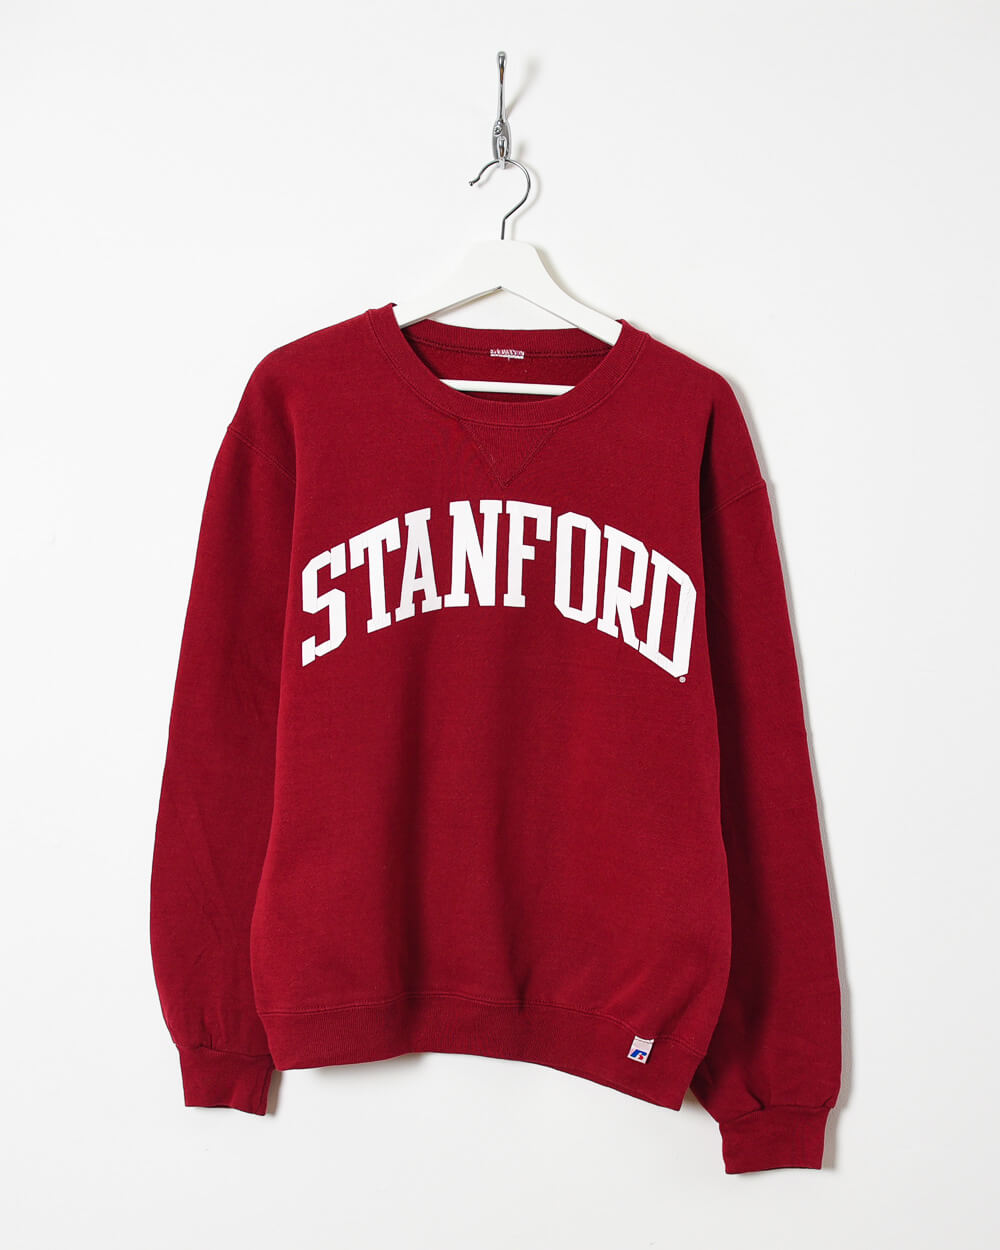 Russell Athletic Stanford Sweatshirt - Small - Domno Vintage 90s, 80s, 00s Retro and Vintage Clothing 